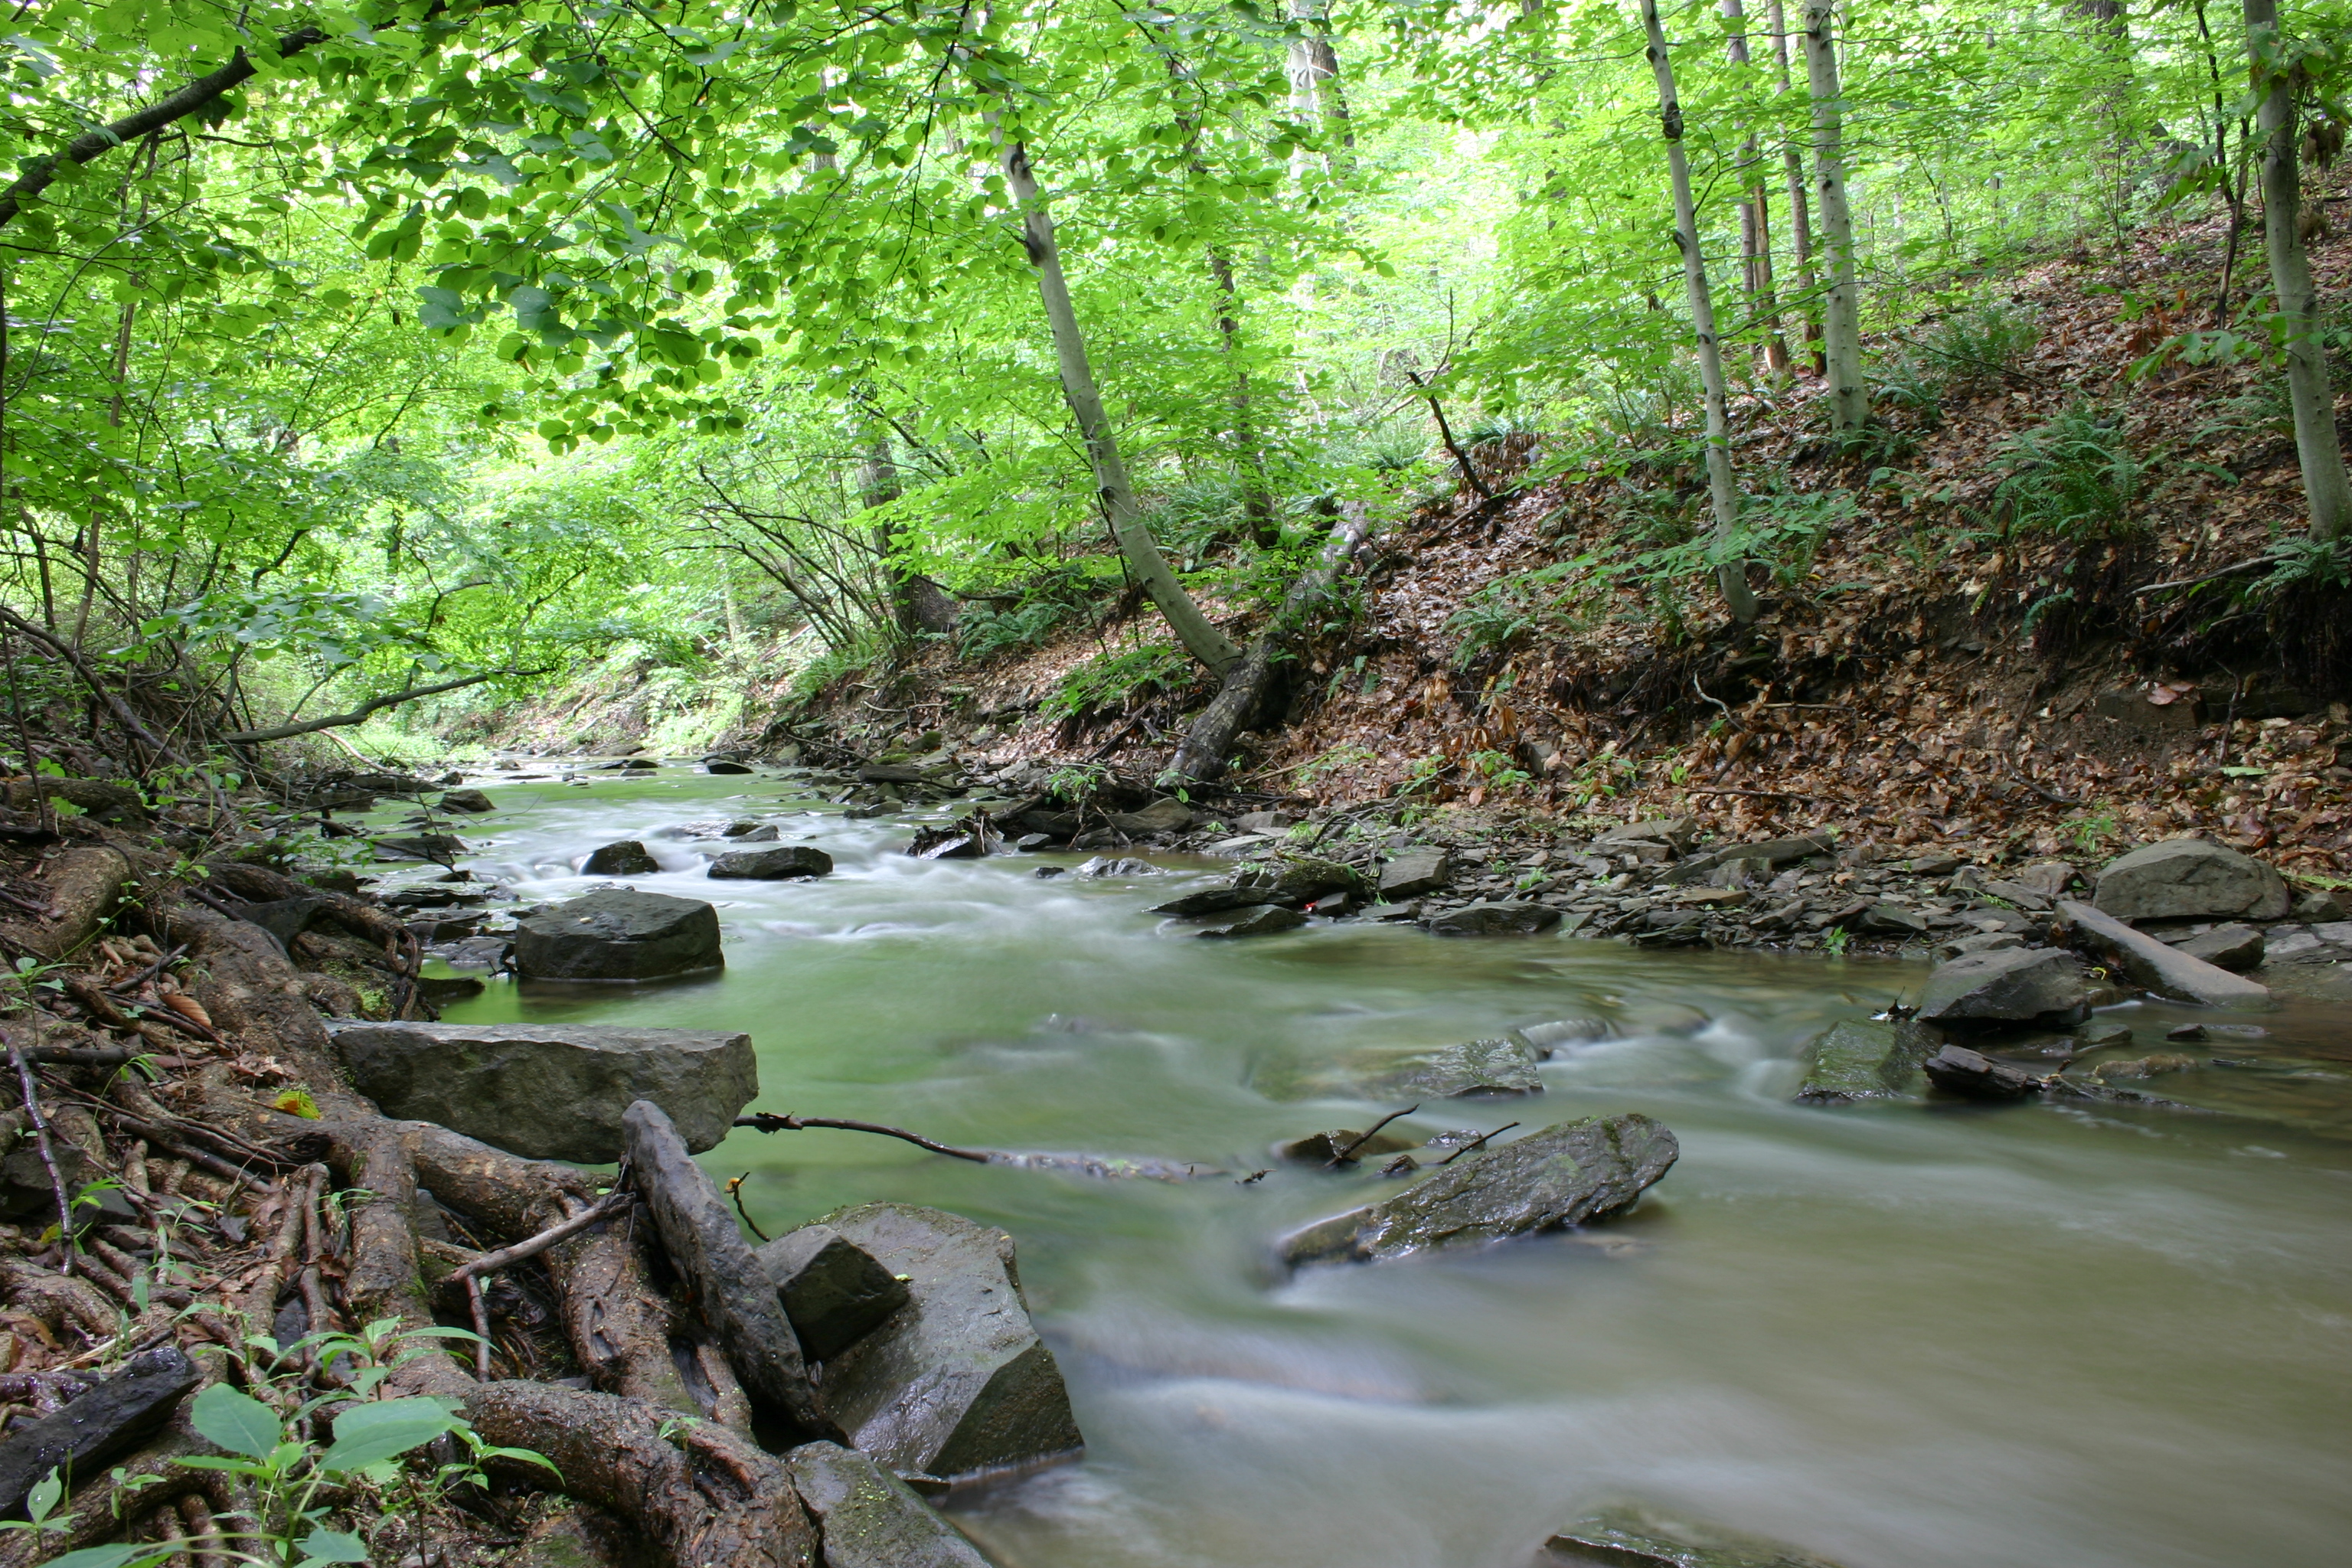 Forest & Creek in Eagleville, PA.  Kyle R. Burton. 2004.  Wikipedia Commons.